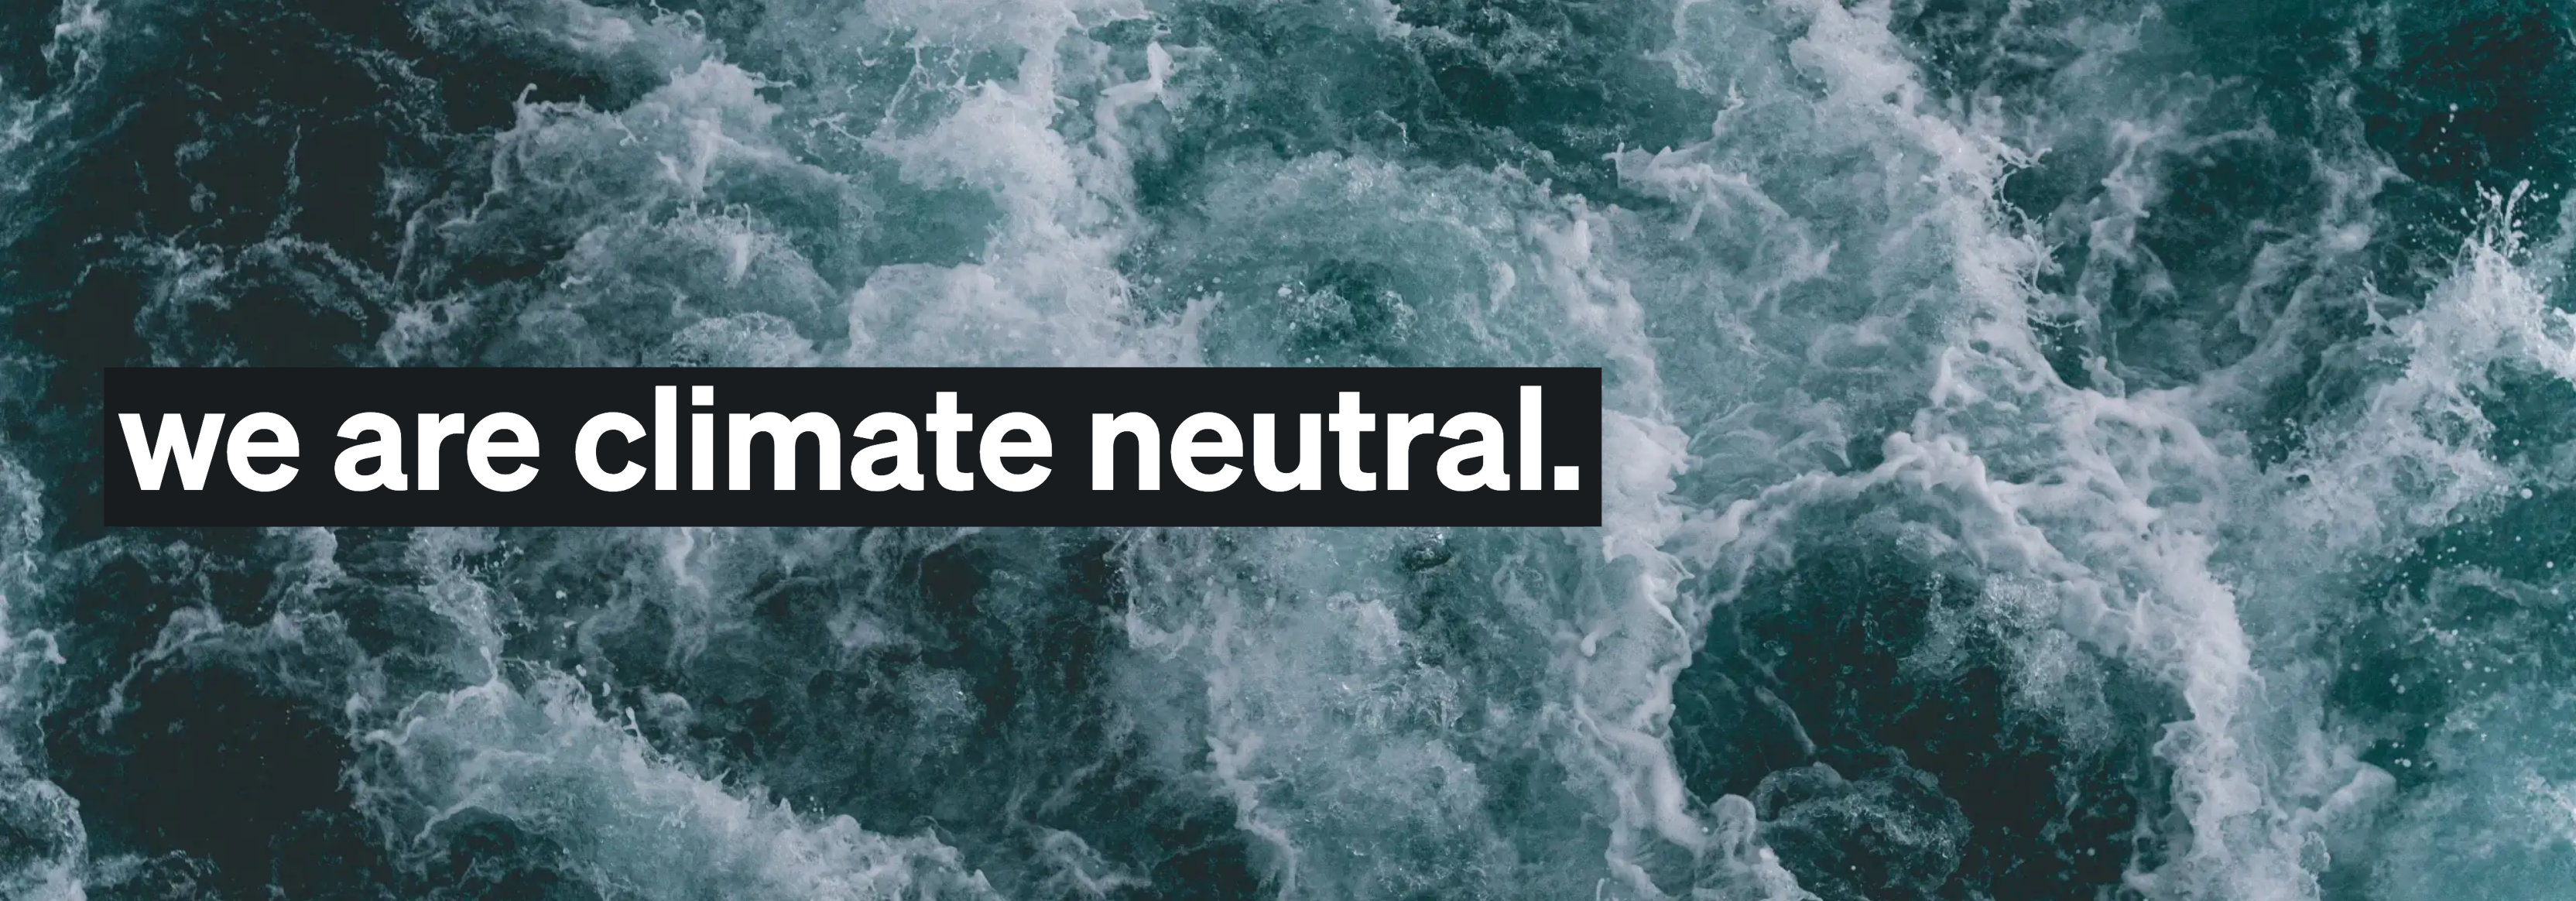 We are climate neutral